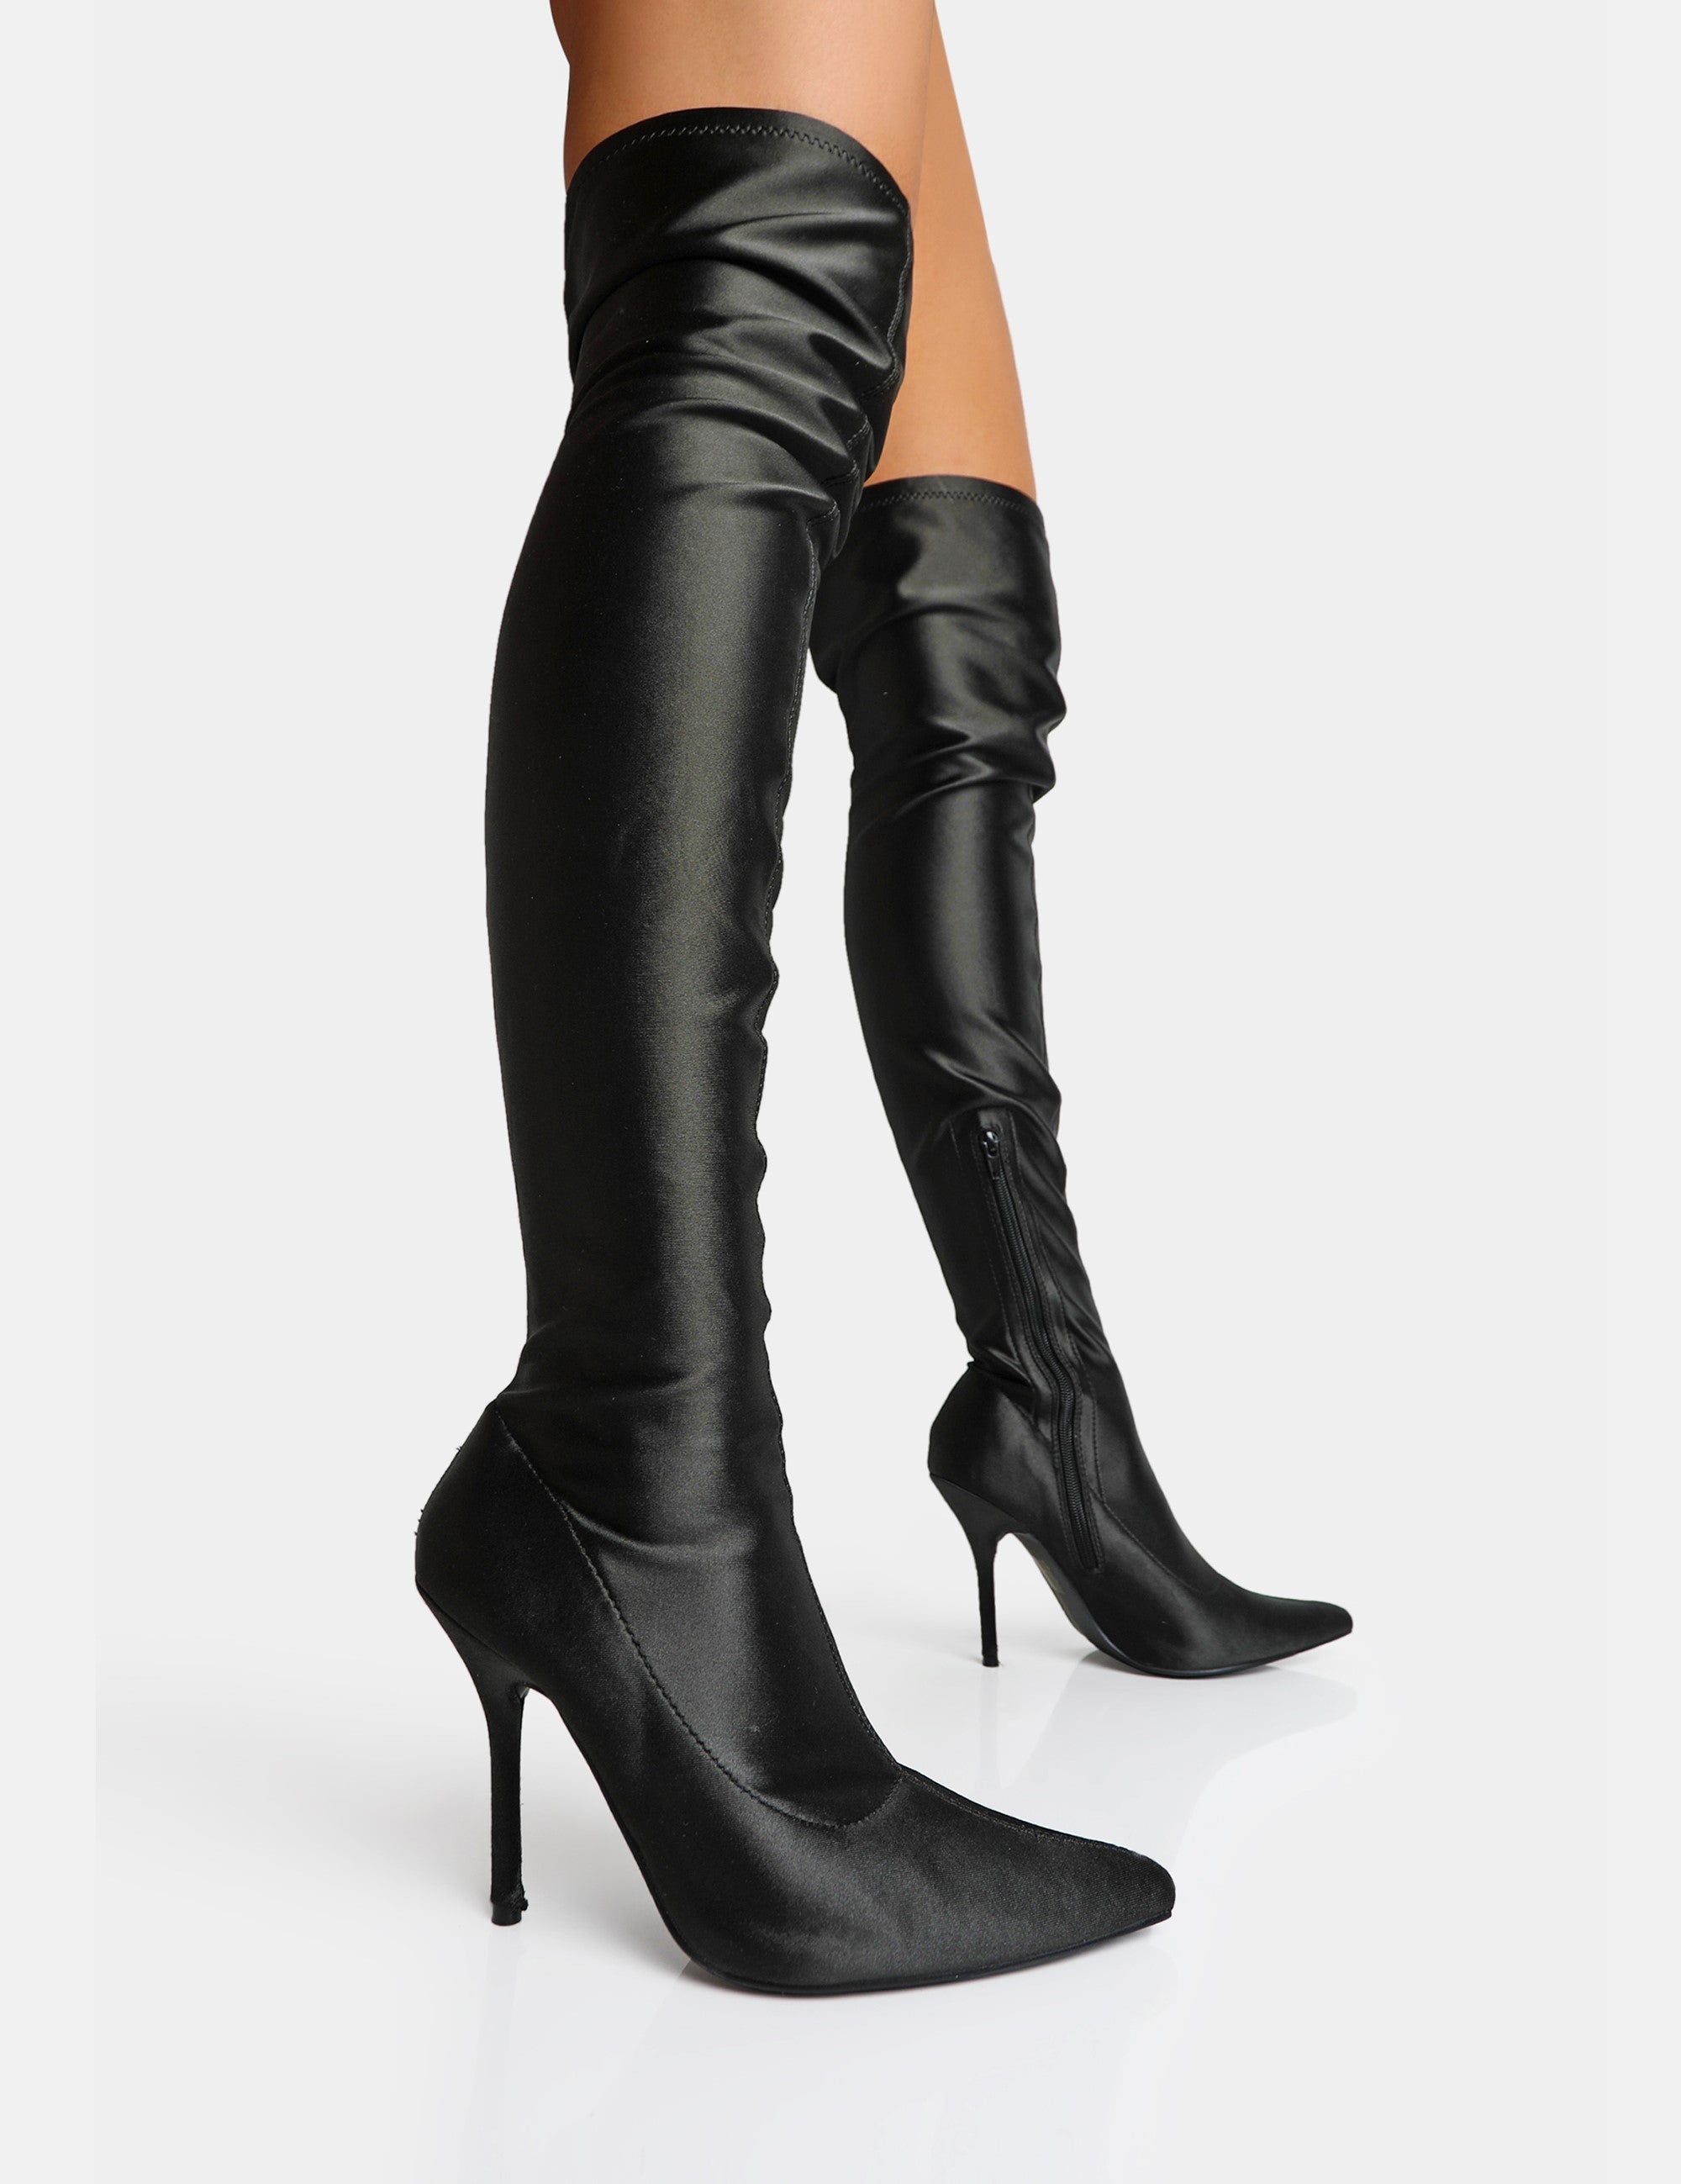 Woman Wearing Thigh High Heel Boots Stock Photo - Image of asian, tips:  171398772